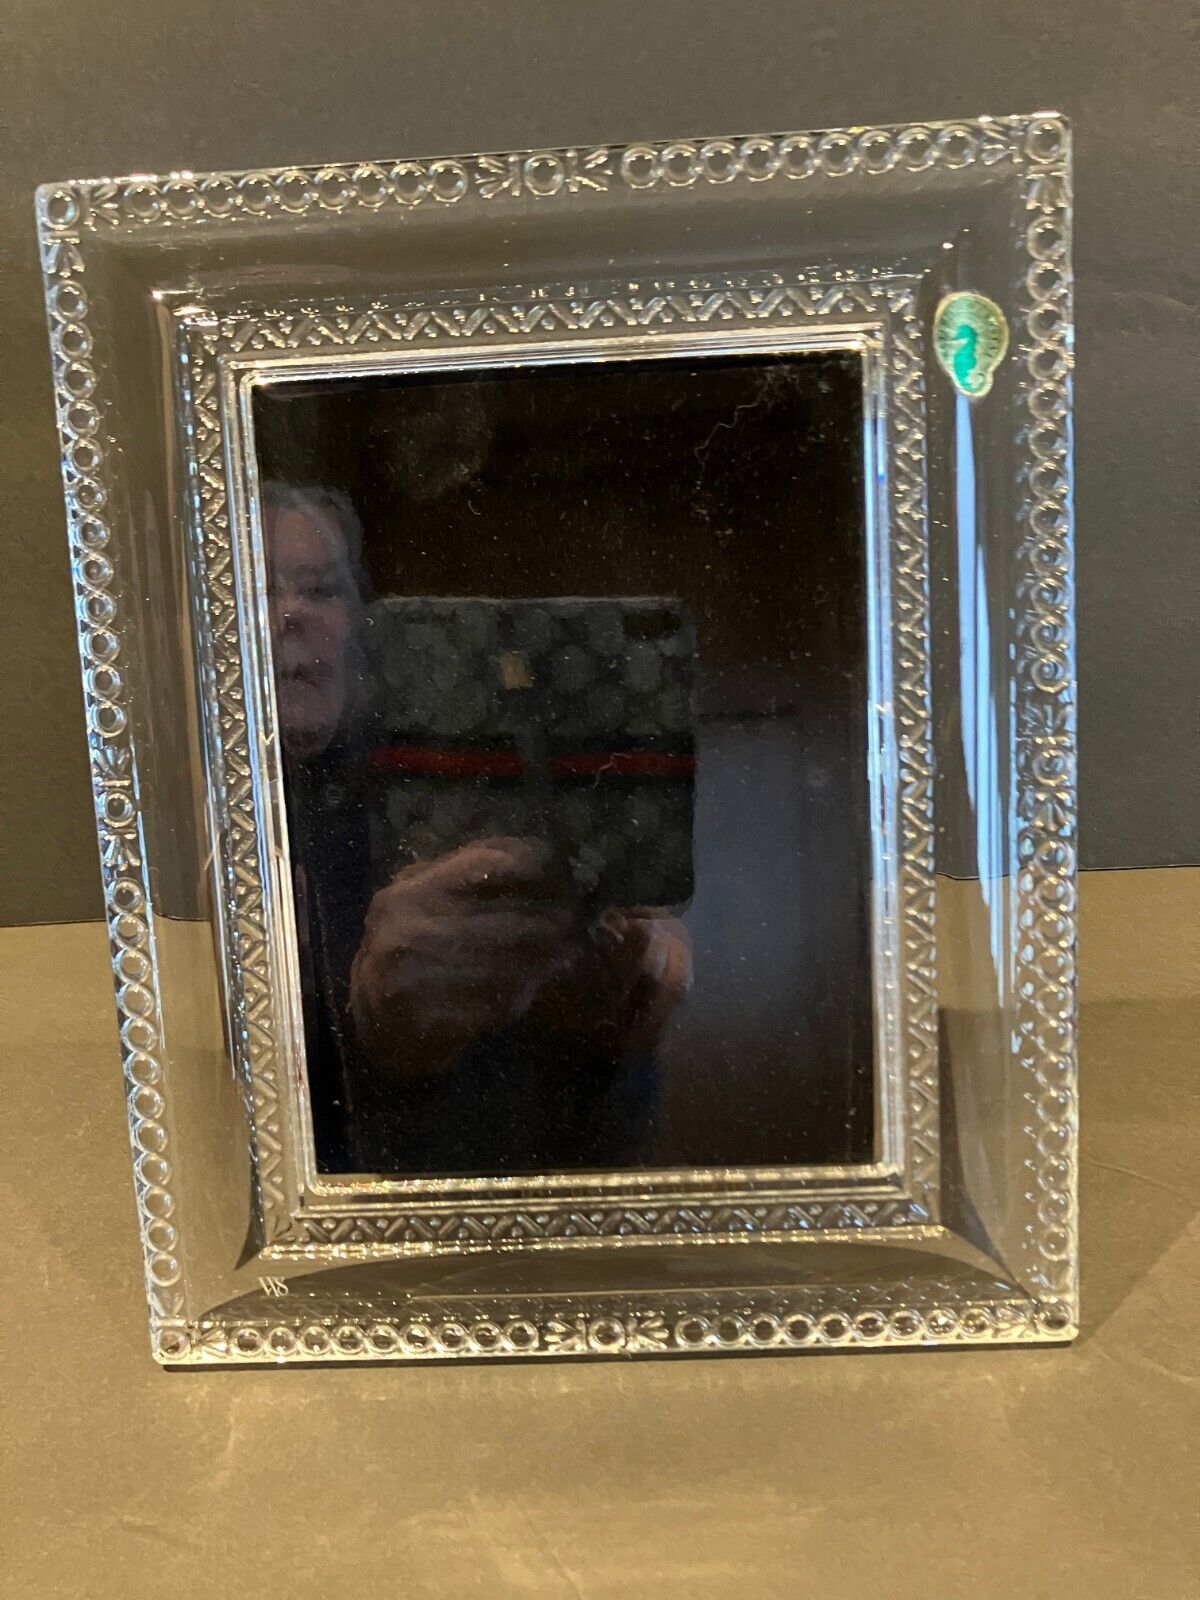 VINTAGE WATERFORD CRYSTAL “ARDMORE” 8” X 10” CRYSTAL PICTURE FRAME No issues